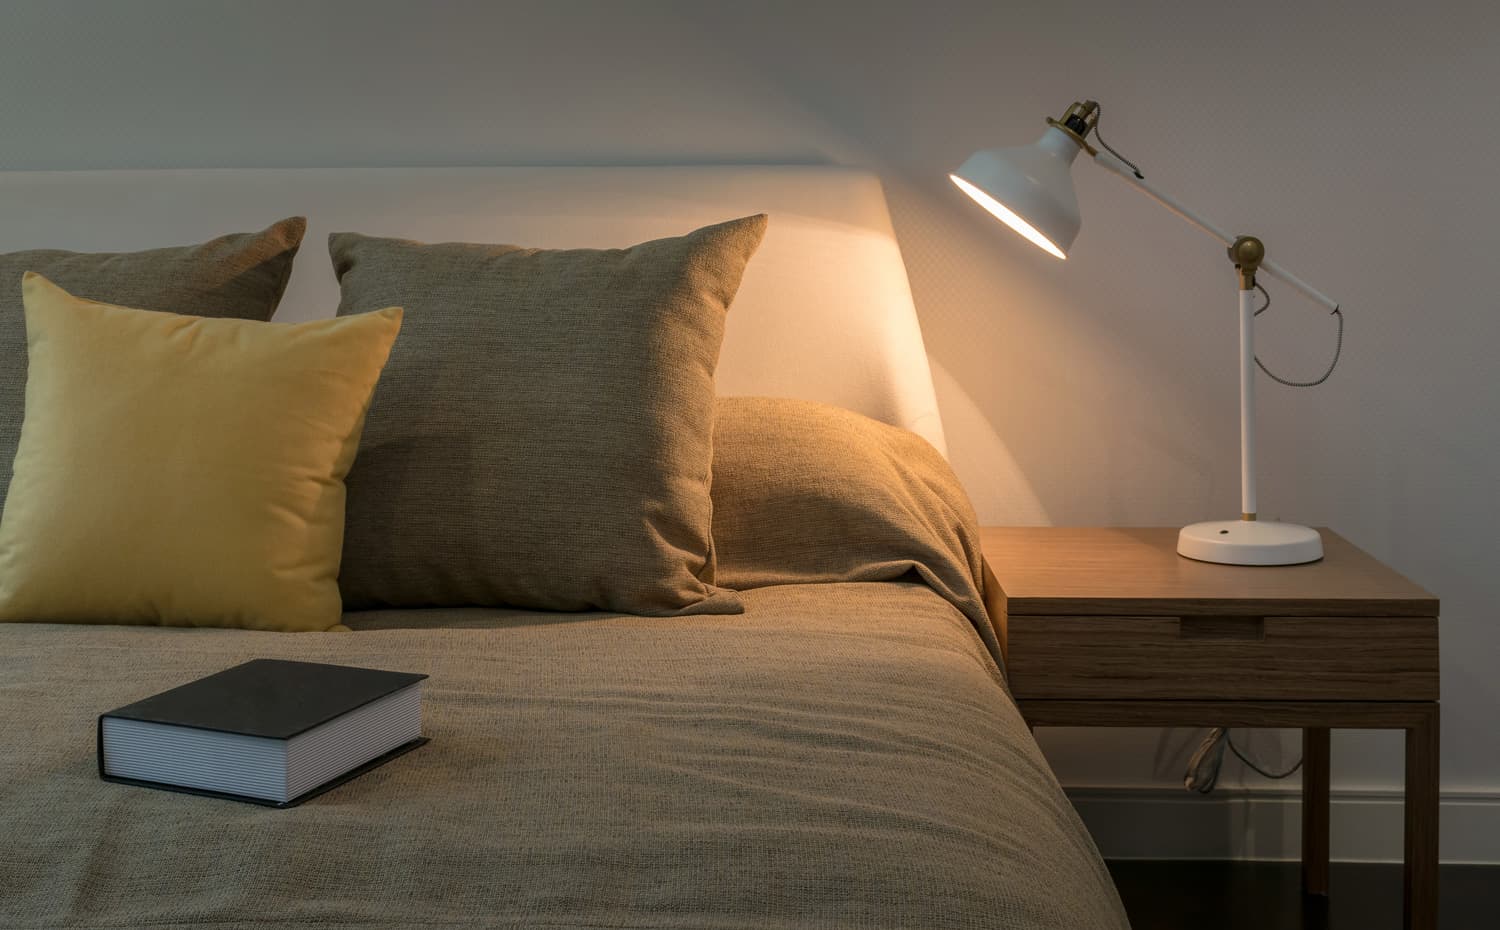 Cozy bedroom interior with book and reading lamp on bedside table